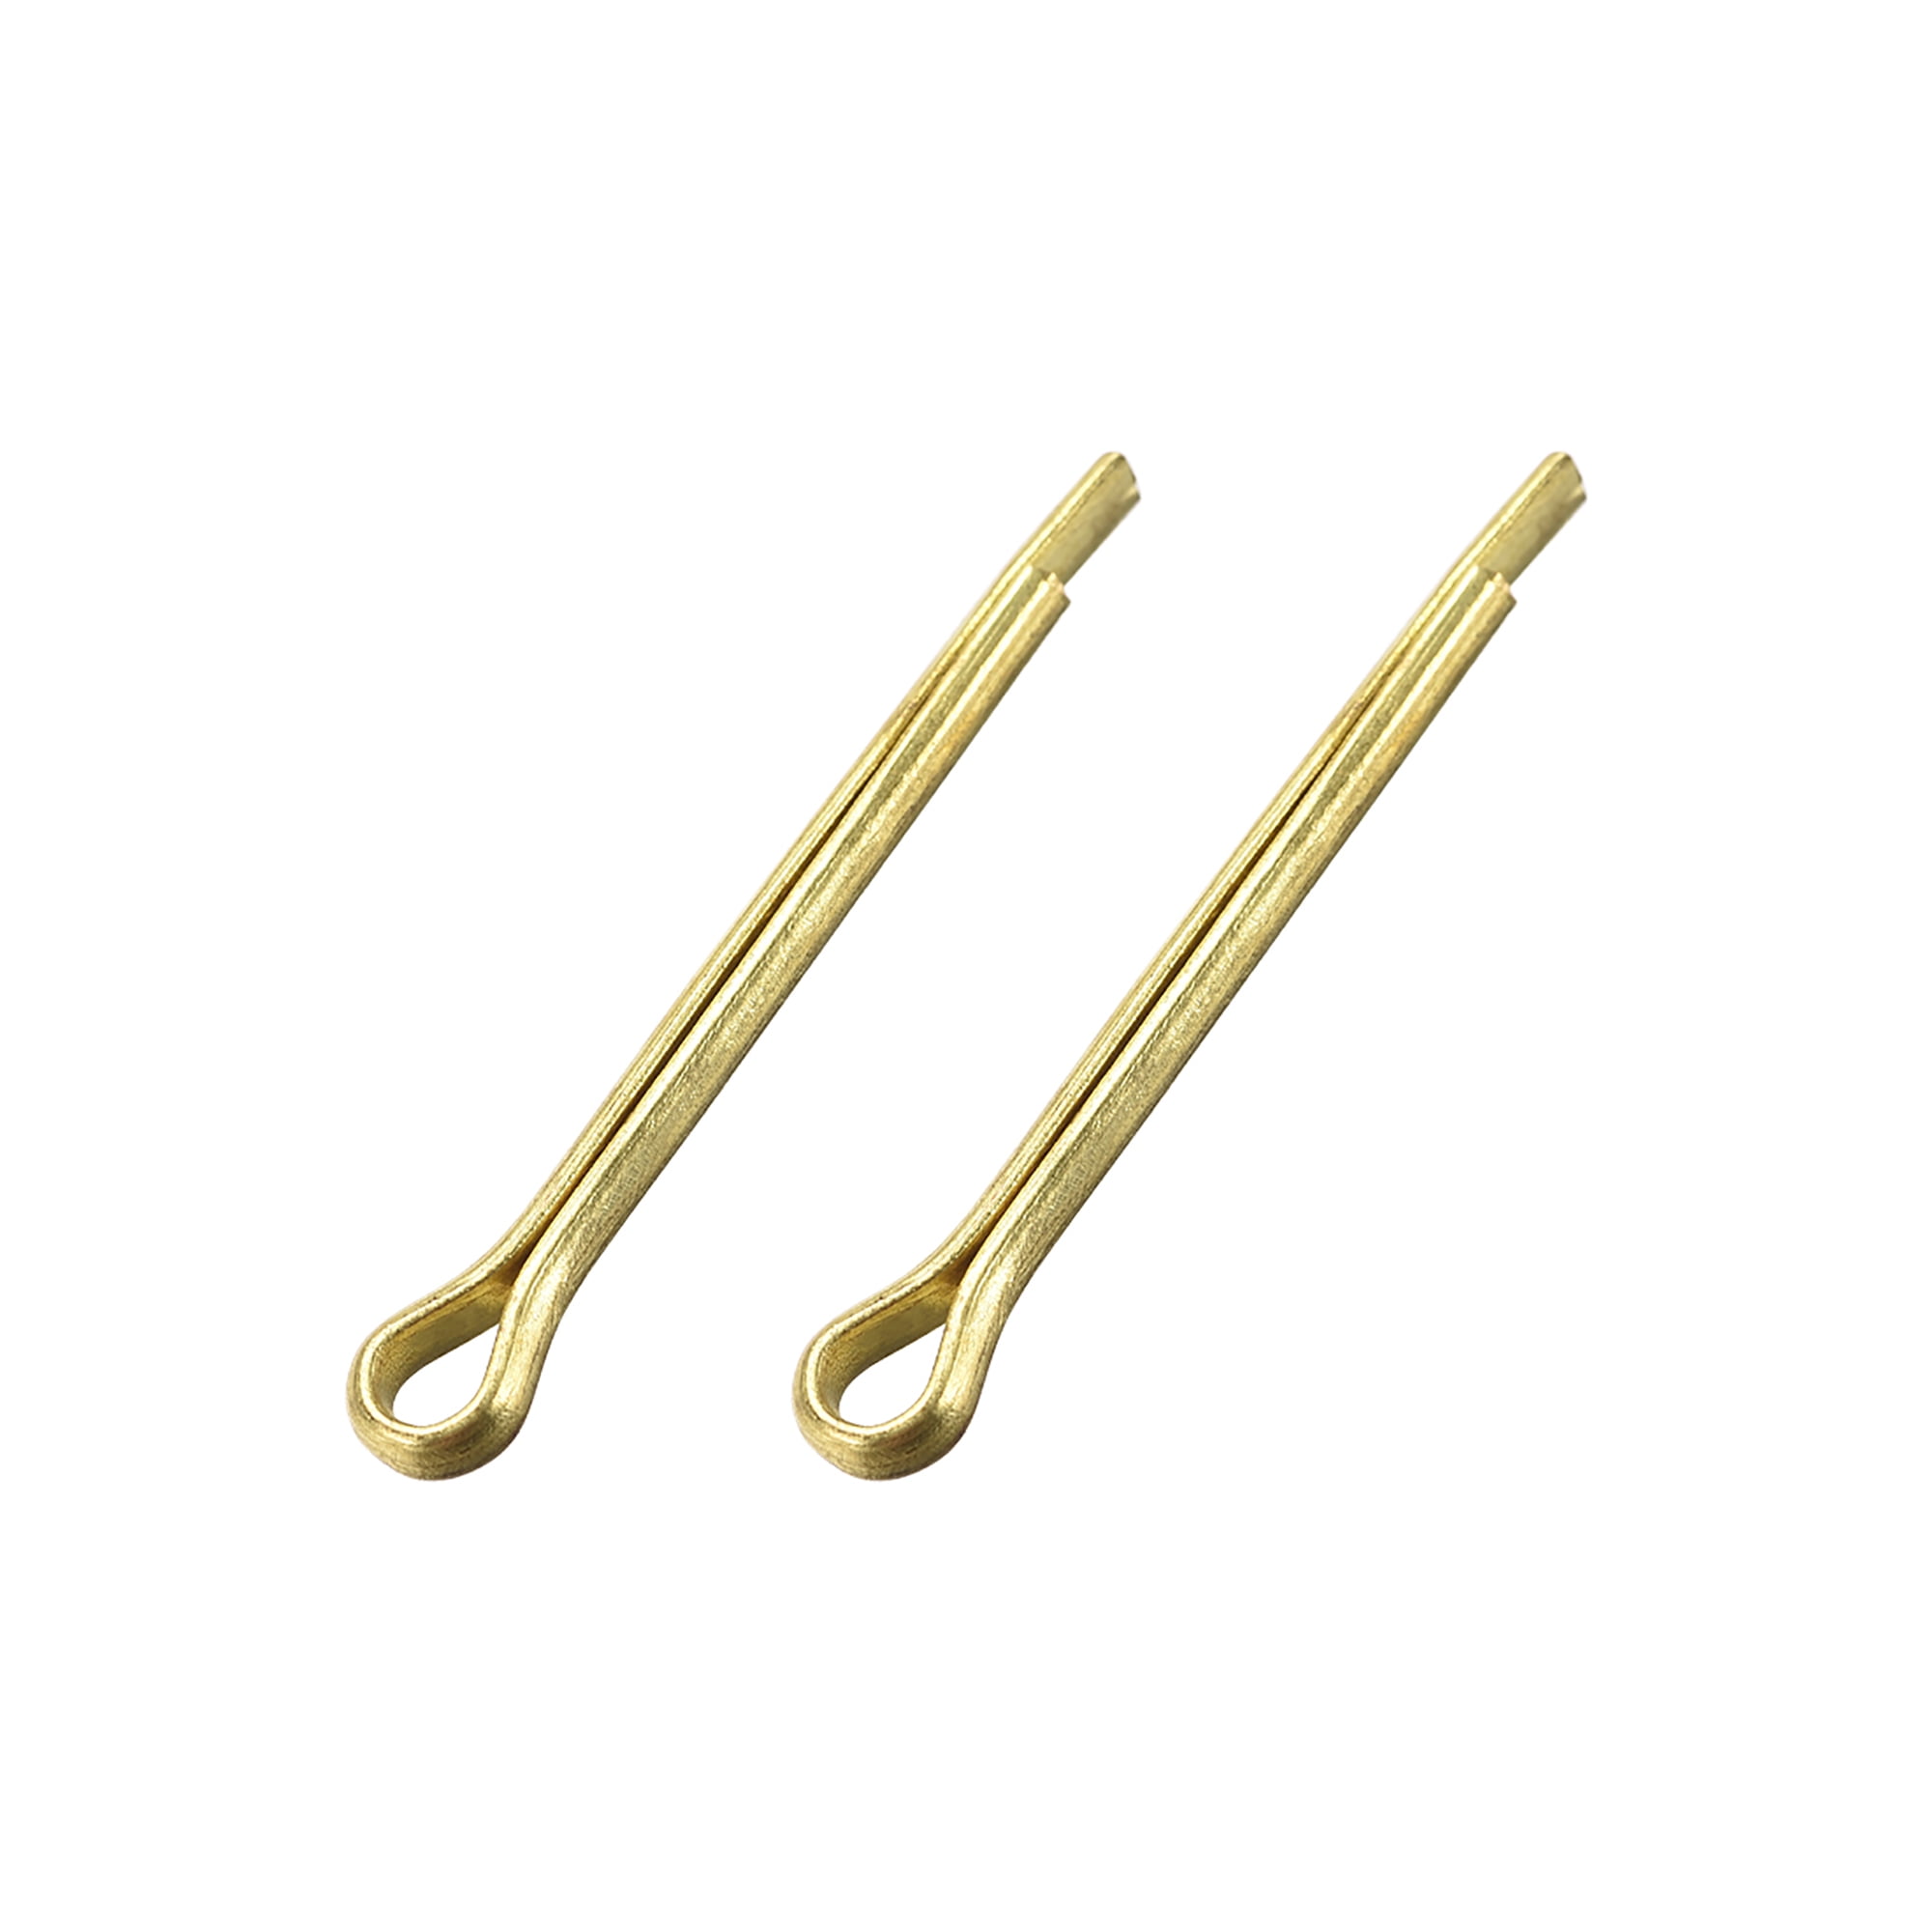 Split Cotter Pin 3mm X 30mm 18 Inch X 1 316 Inch Solid Brass 2 Prongs Gold Tone 2 Pcs 